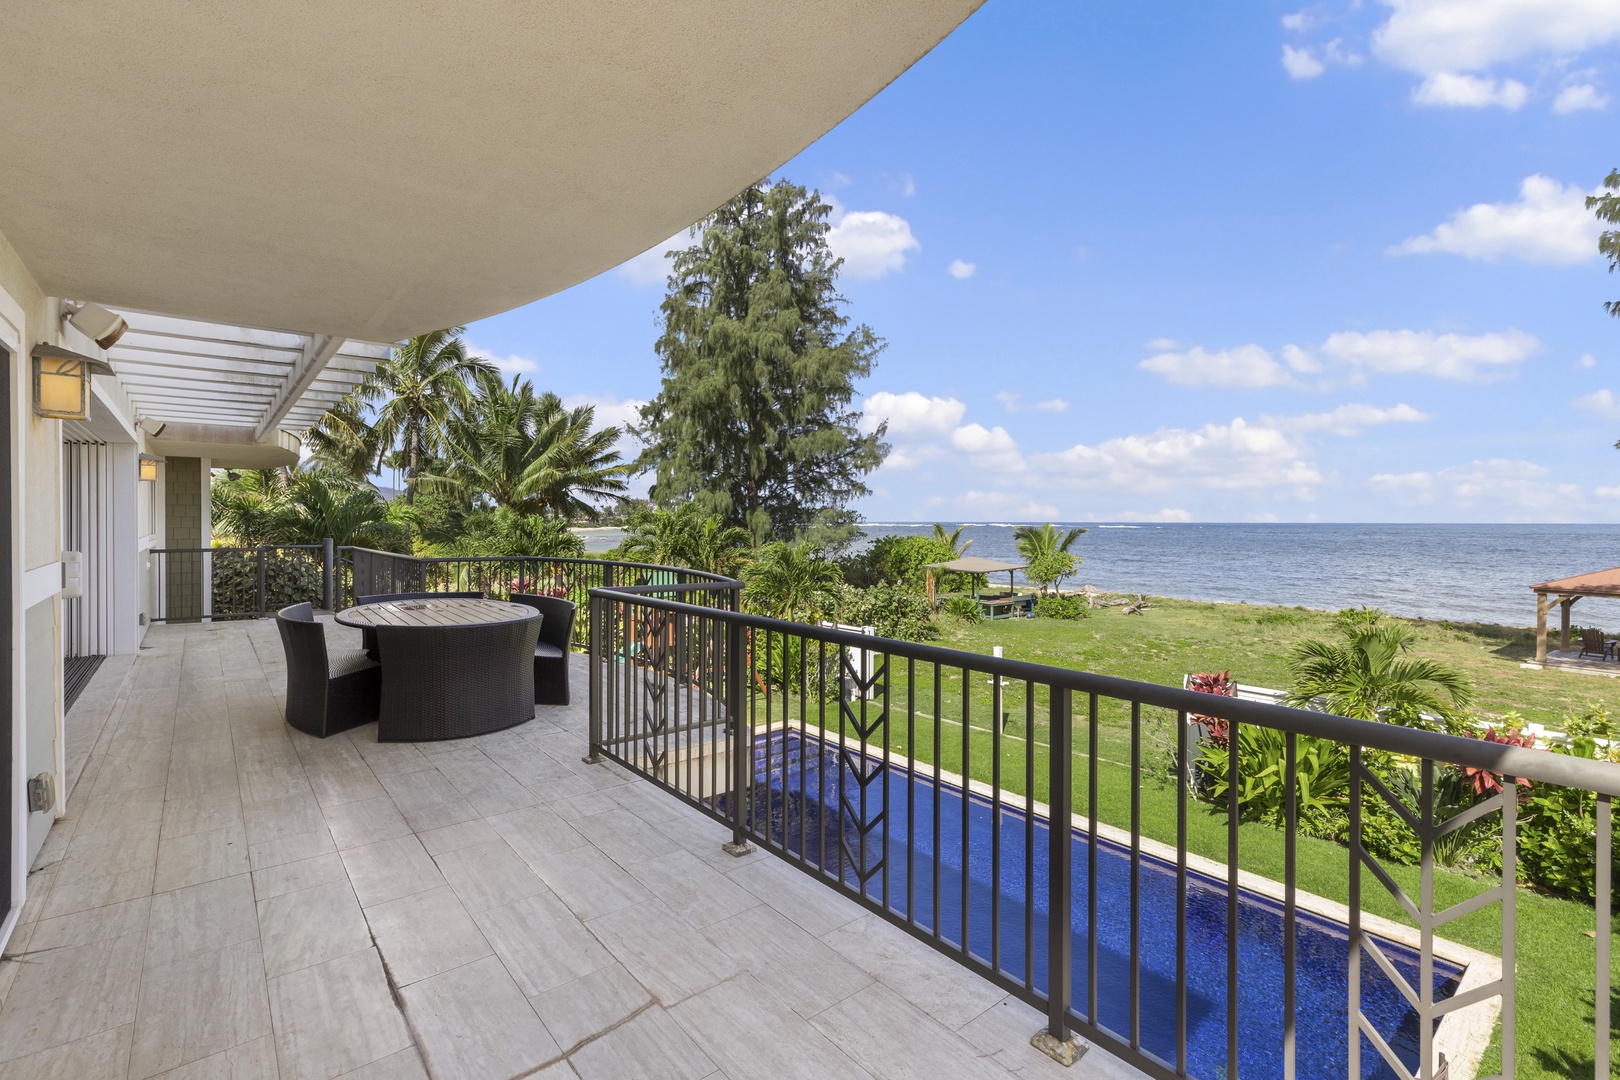 Waialua Vacation Rentals, Kala'iku* - Second-floor entertaining deck with a view of the pool and ocean.